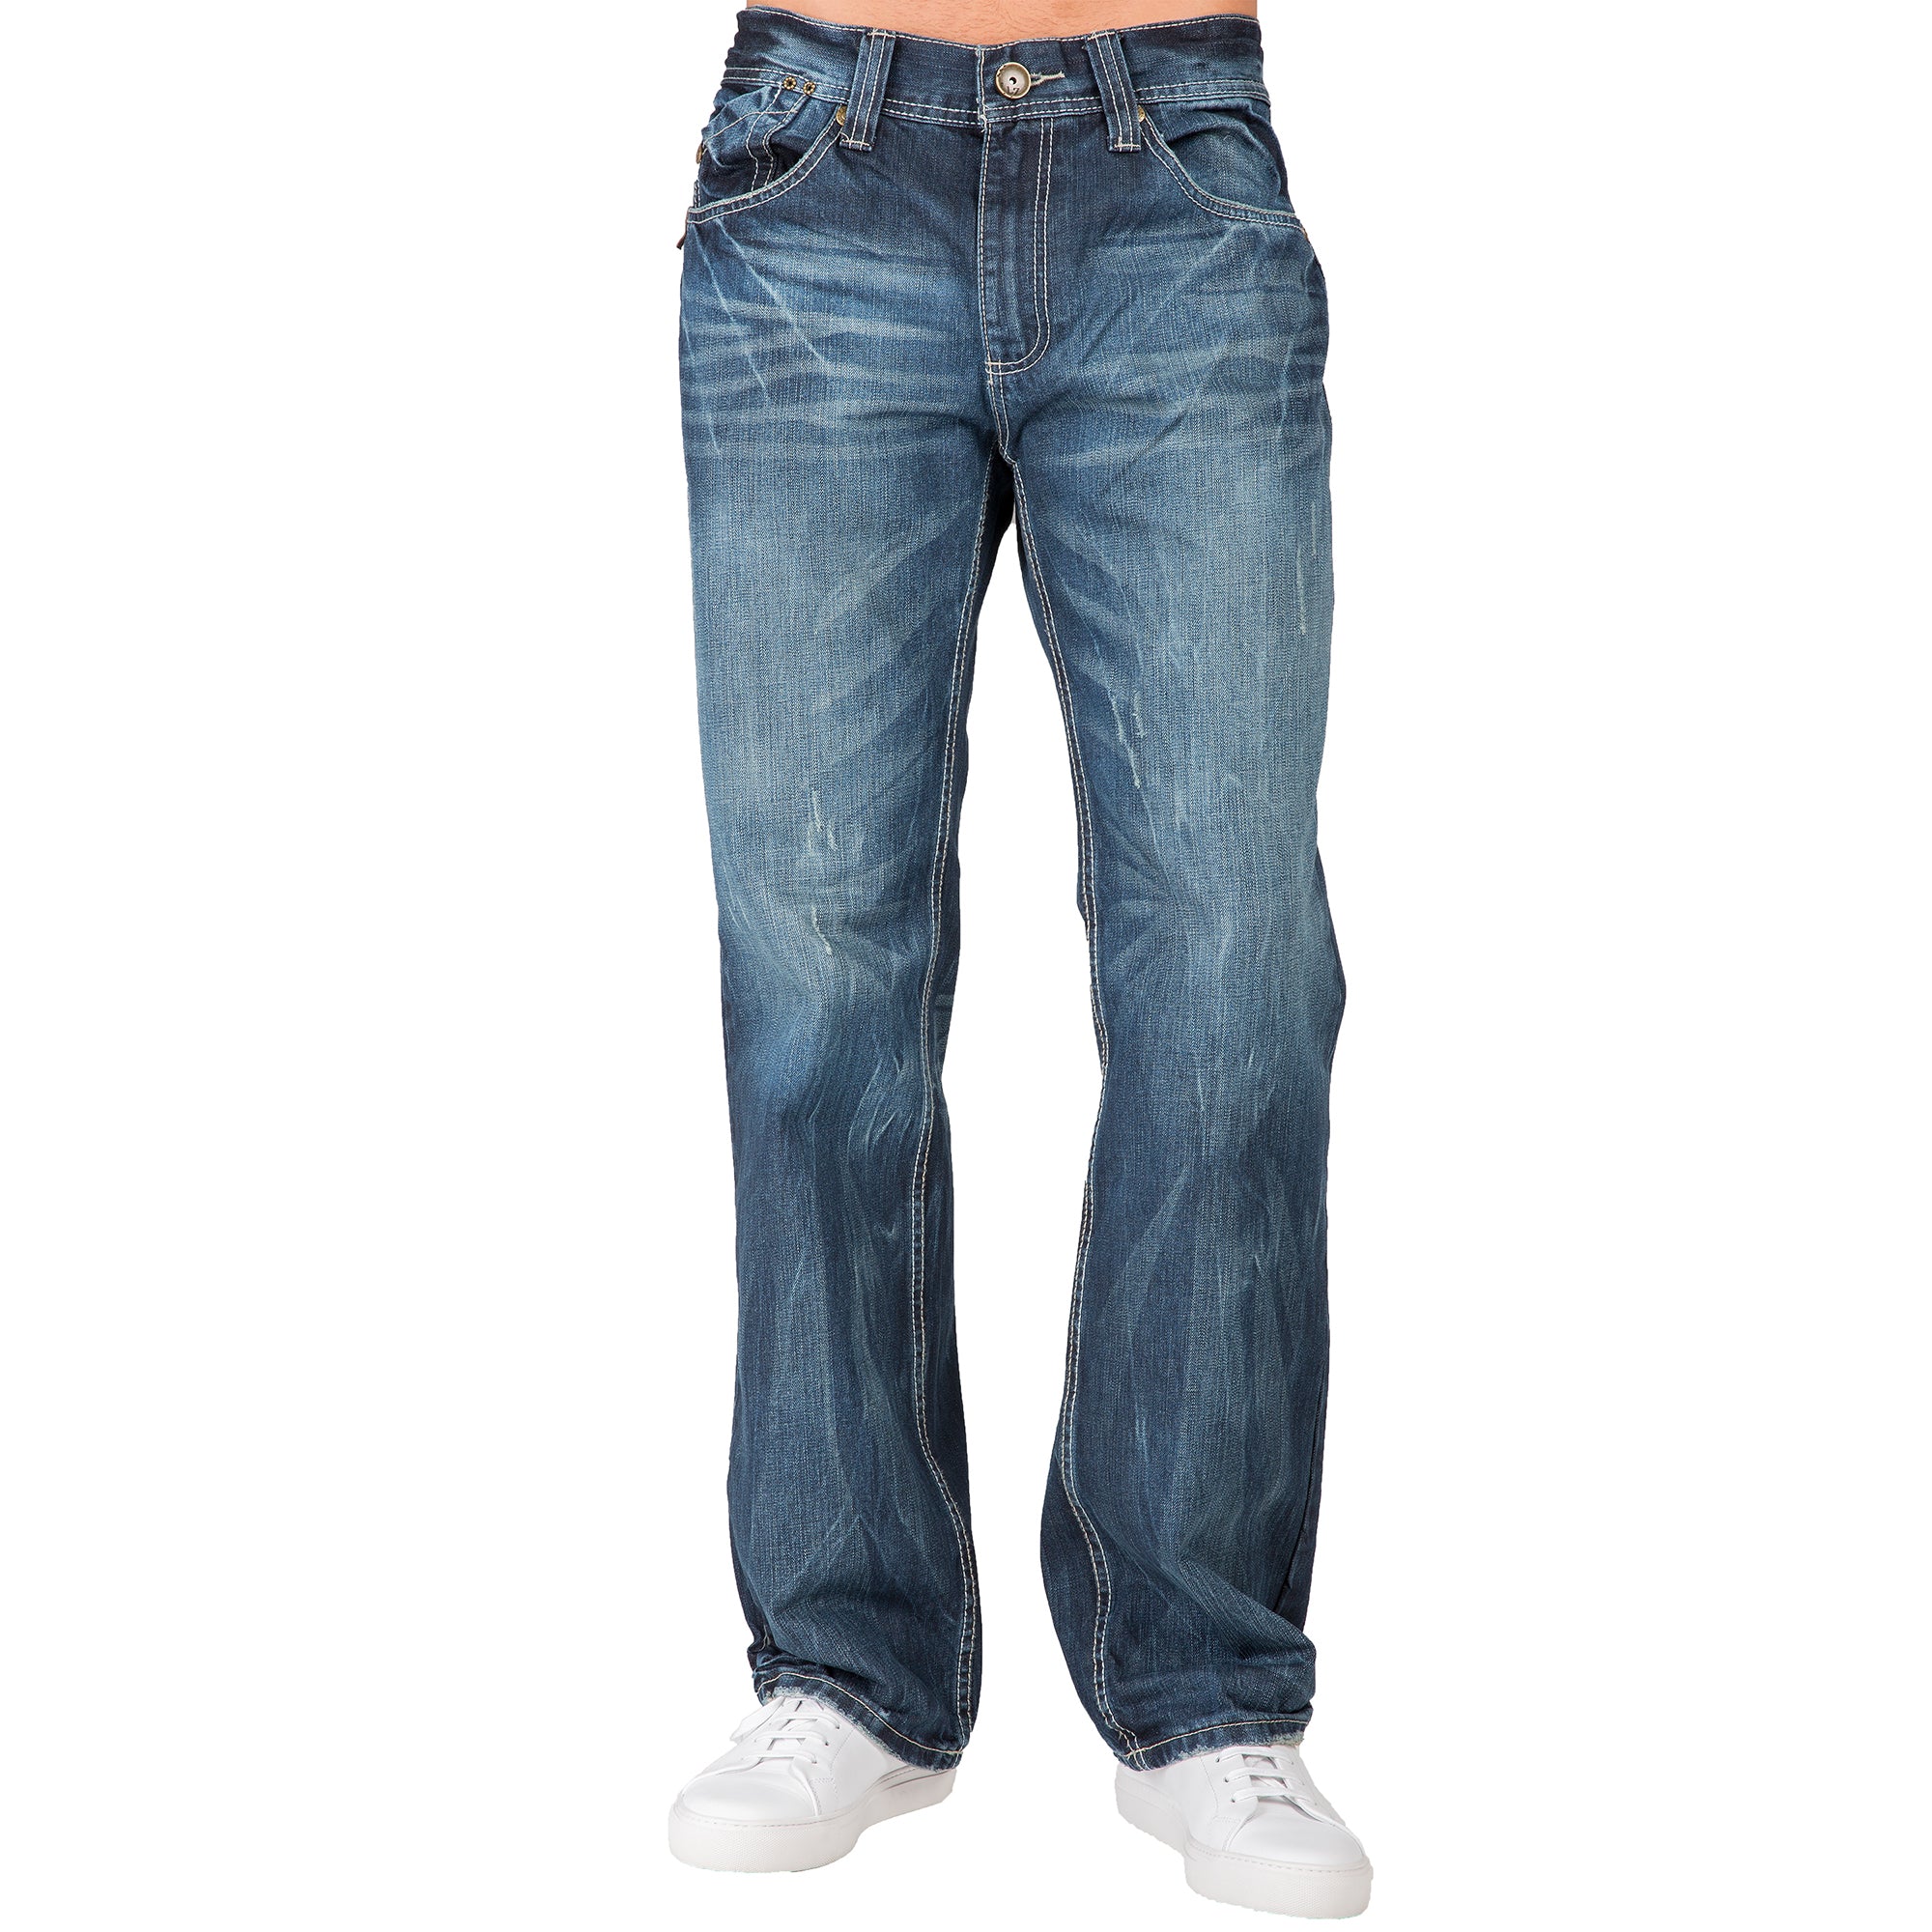 Buckeroo Relaxed Straight Premium Denim signature 5 pocket Jeans Whiskering Scratching